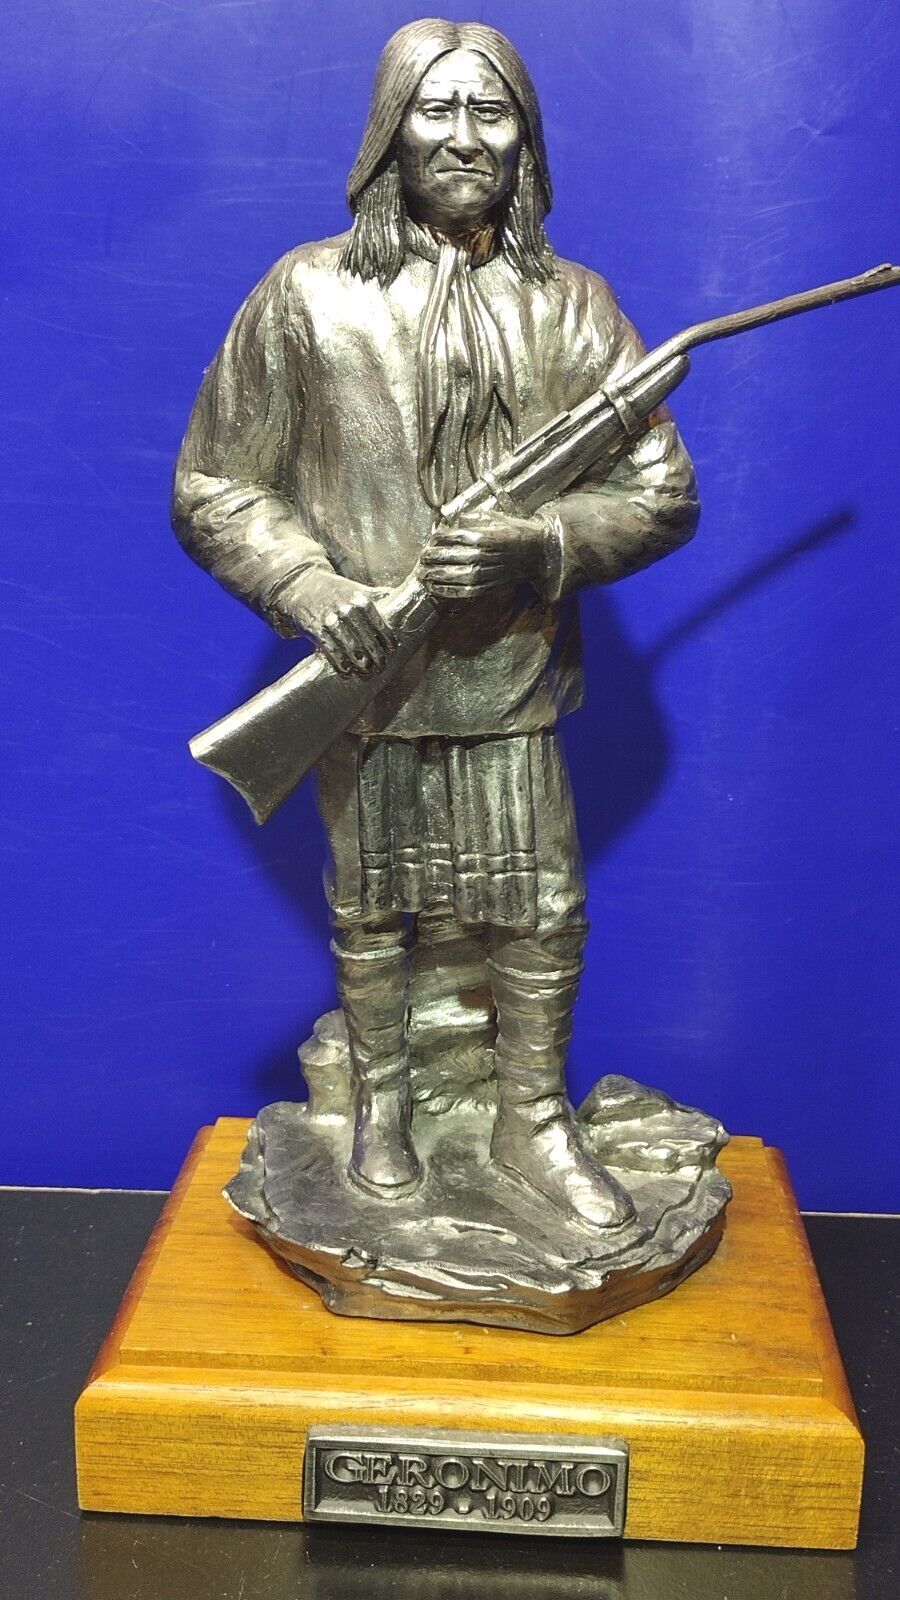 Michael Ricker Pewter Geronimo 1829-1909 Sculpture Signed & Numbered 566/800 -LE